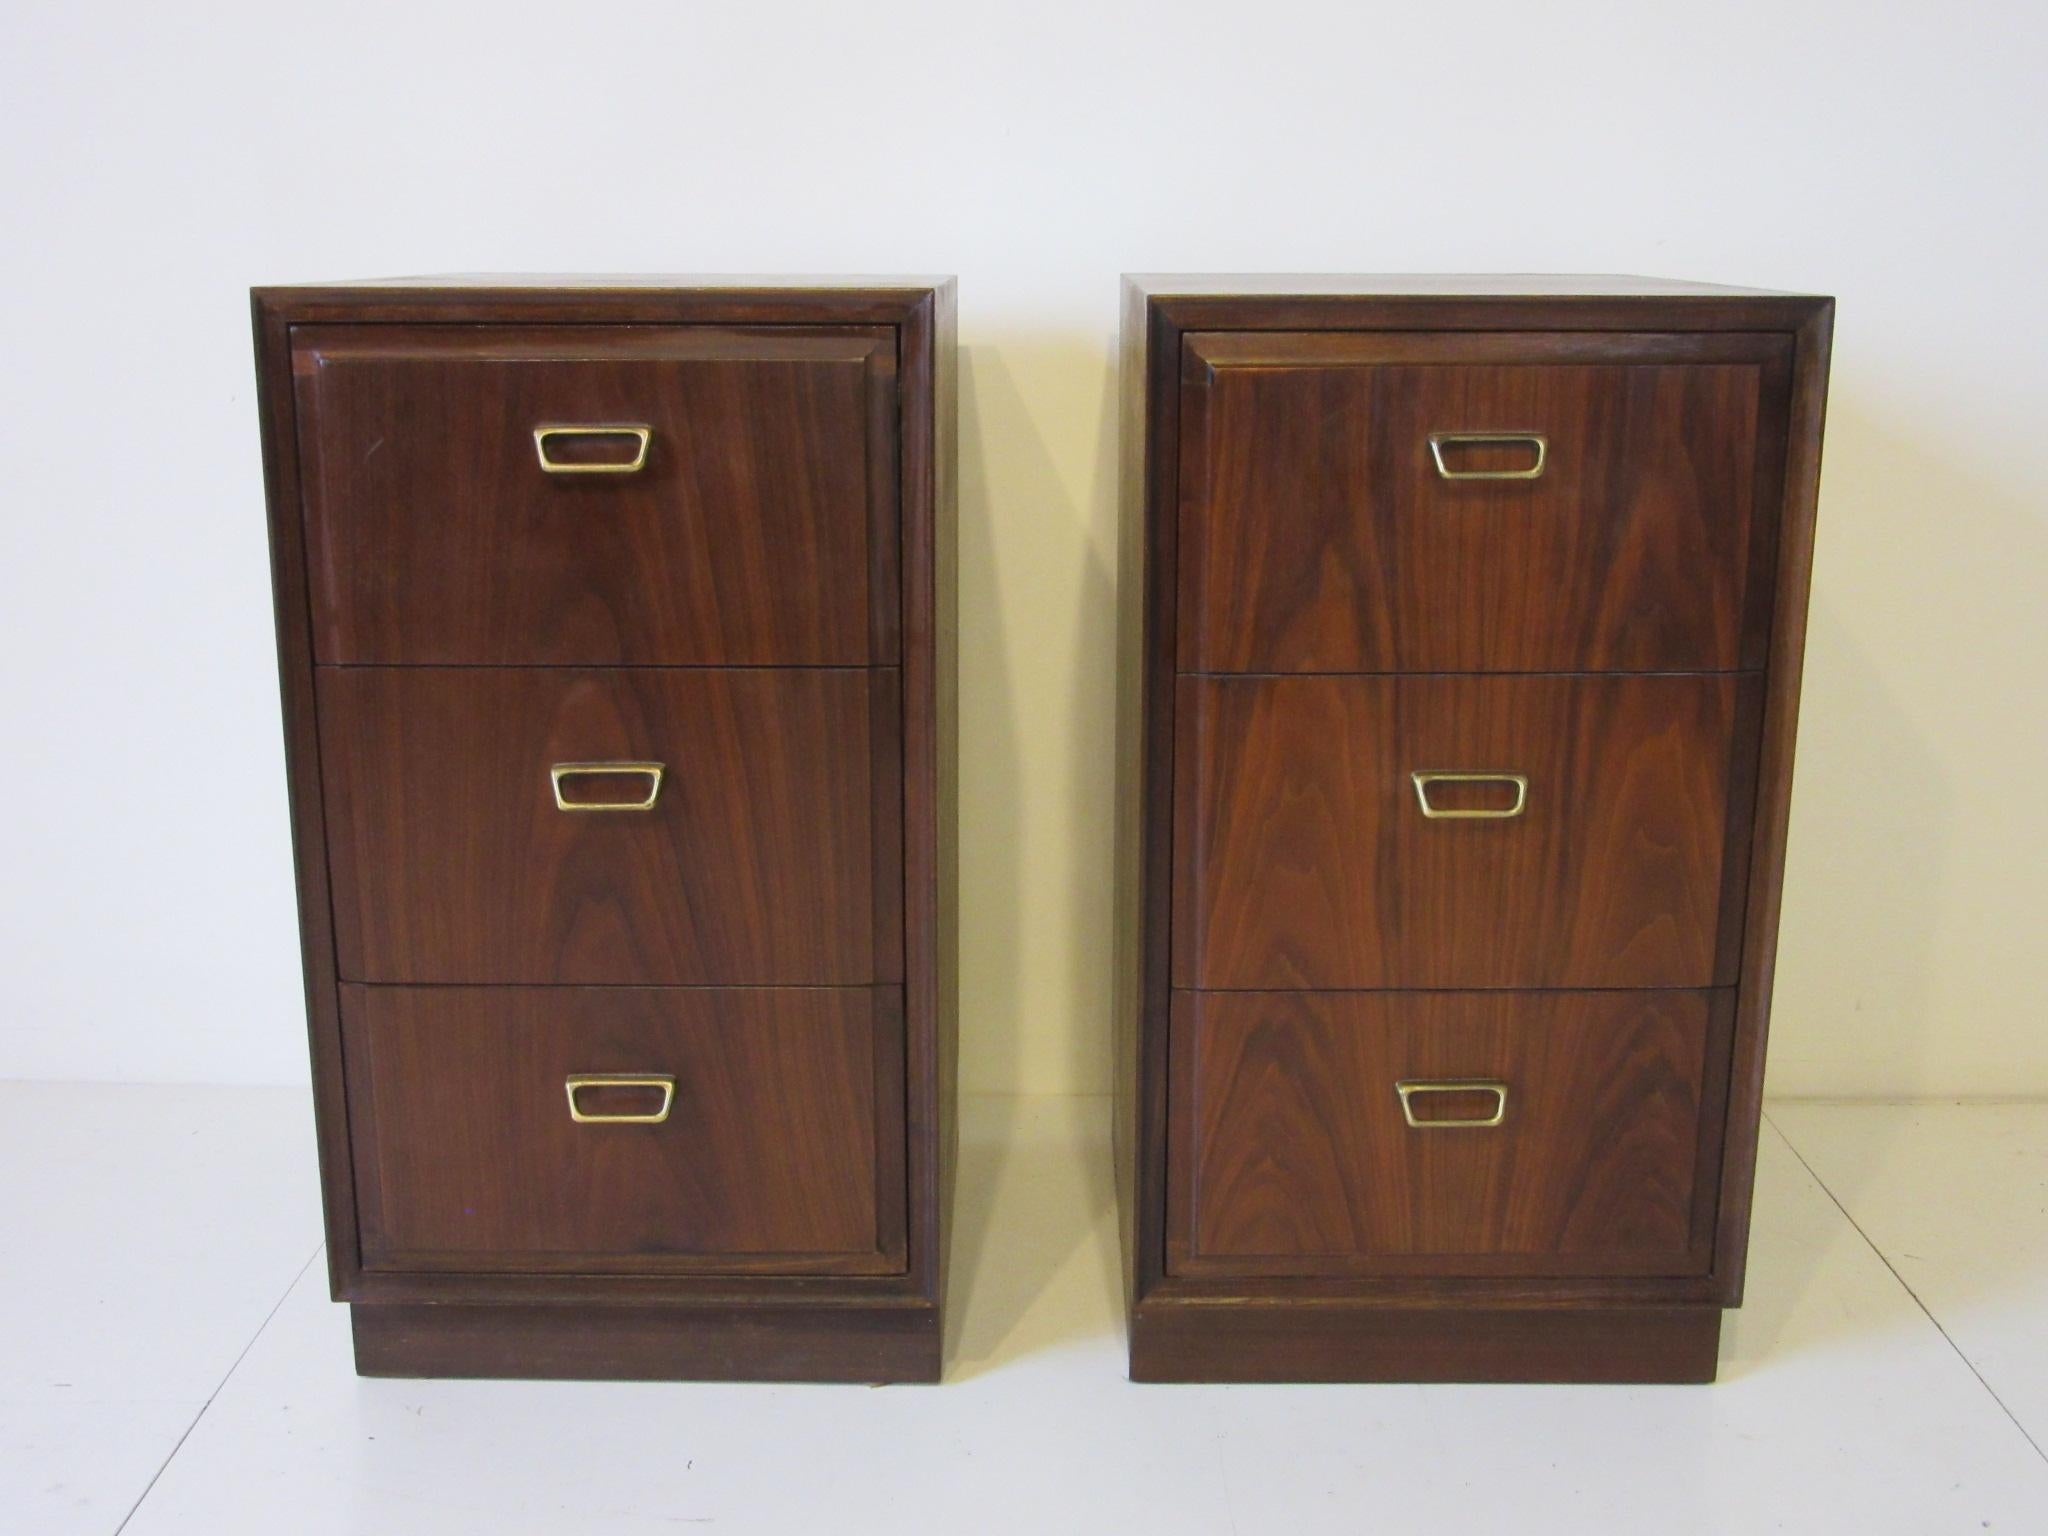 A pair of beautifully grained three drawer nightstands with brass toned pulls; these are a bit tall in design which is perfect for the new styled mattress that needs a taller profile, well constructed by the Founders Furniture Company.